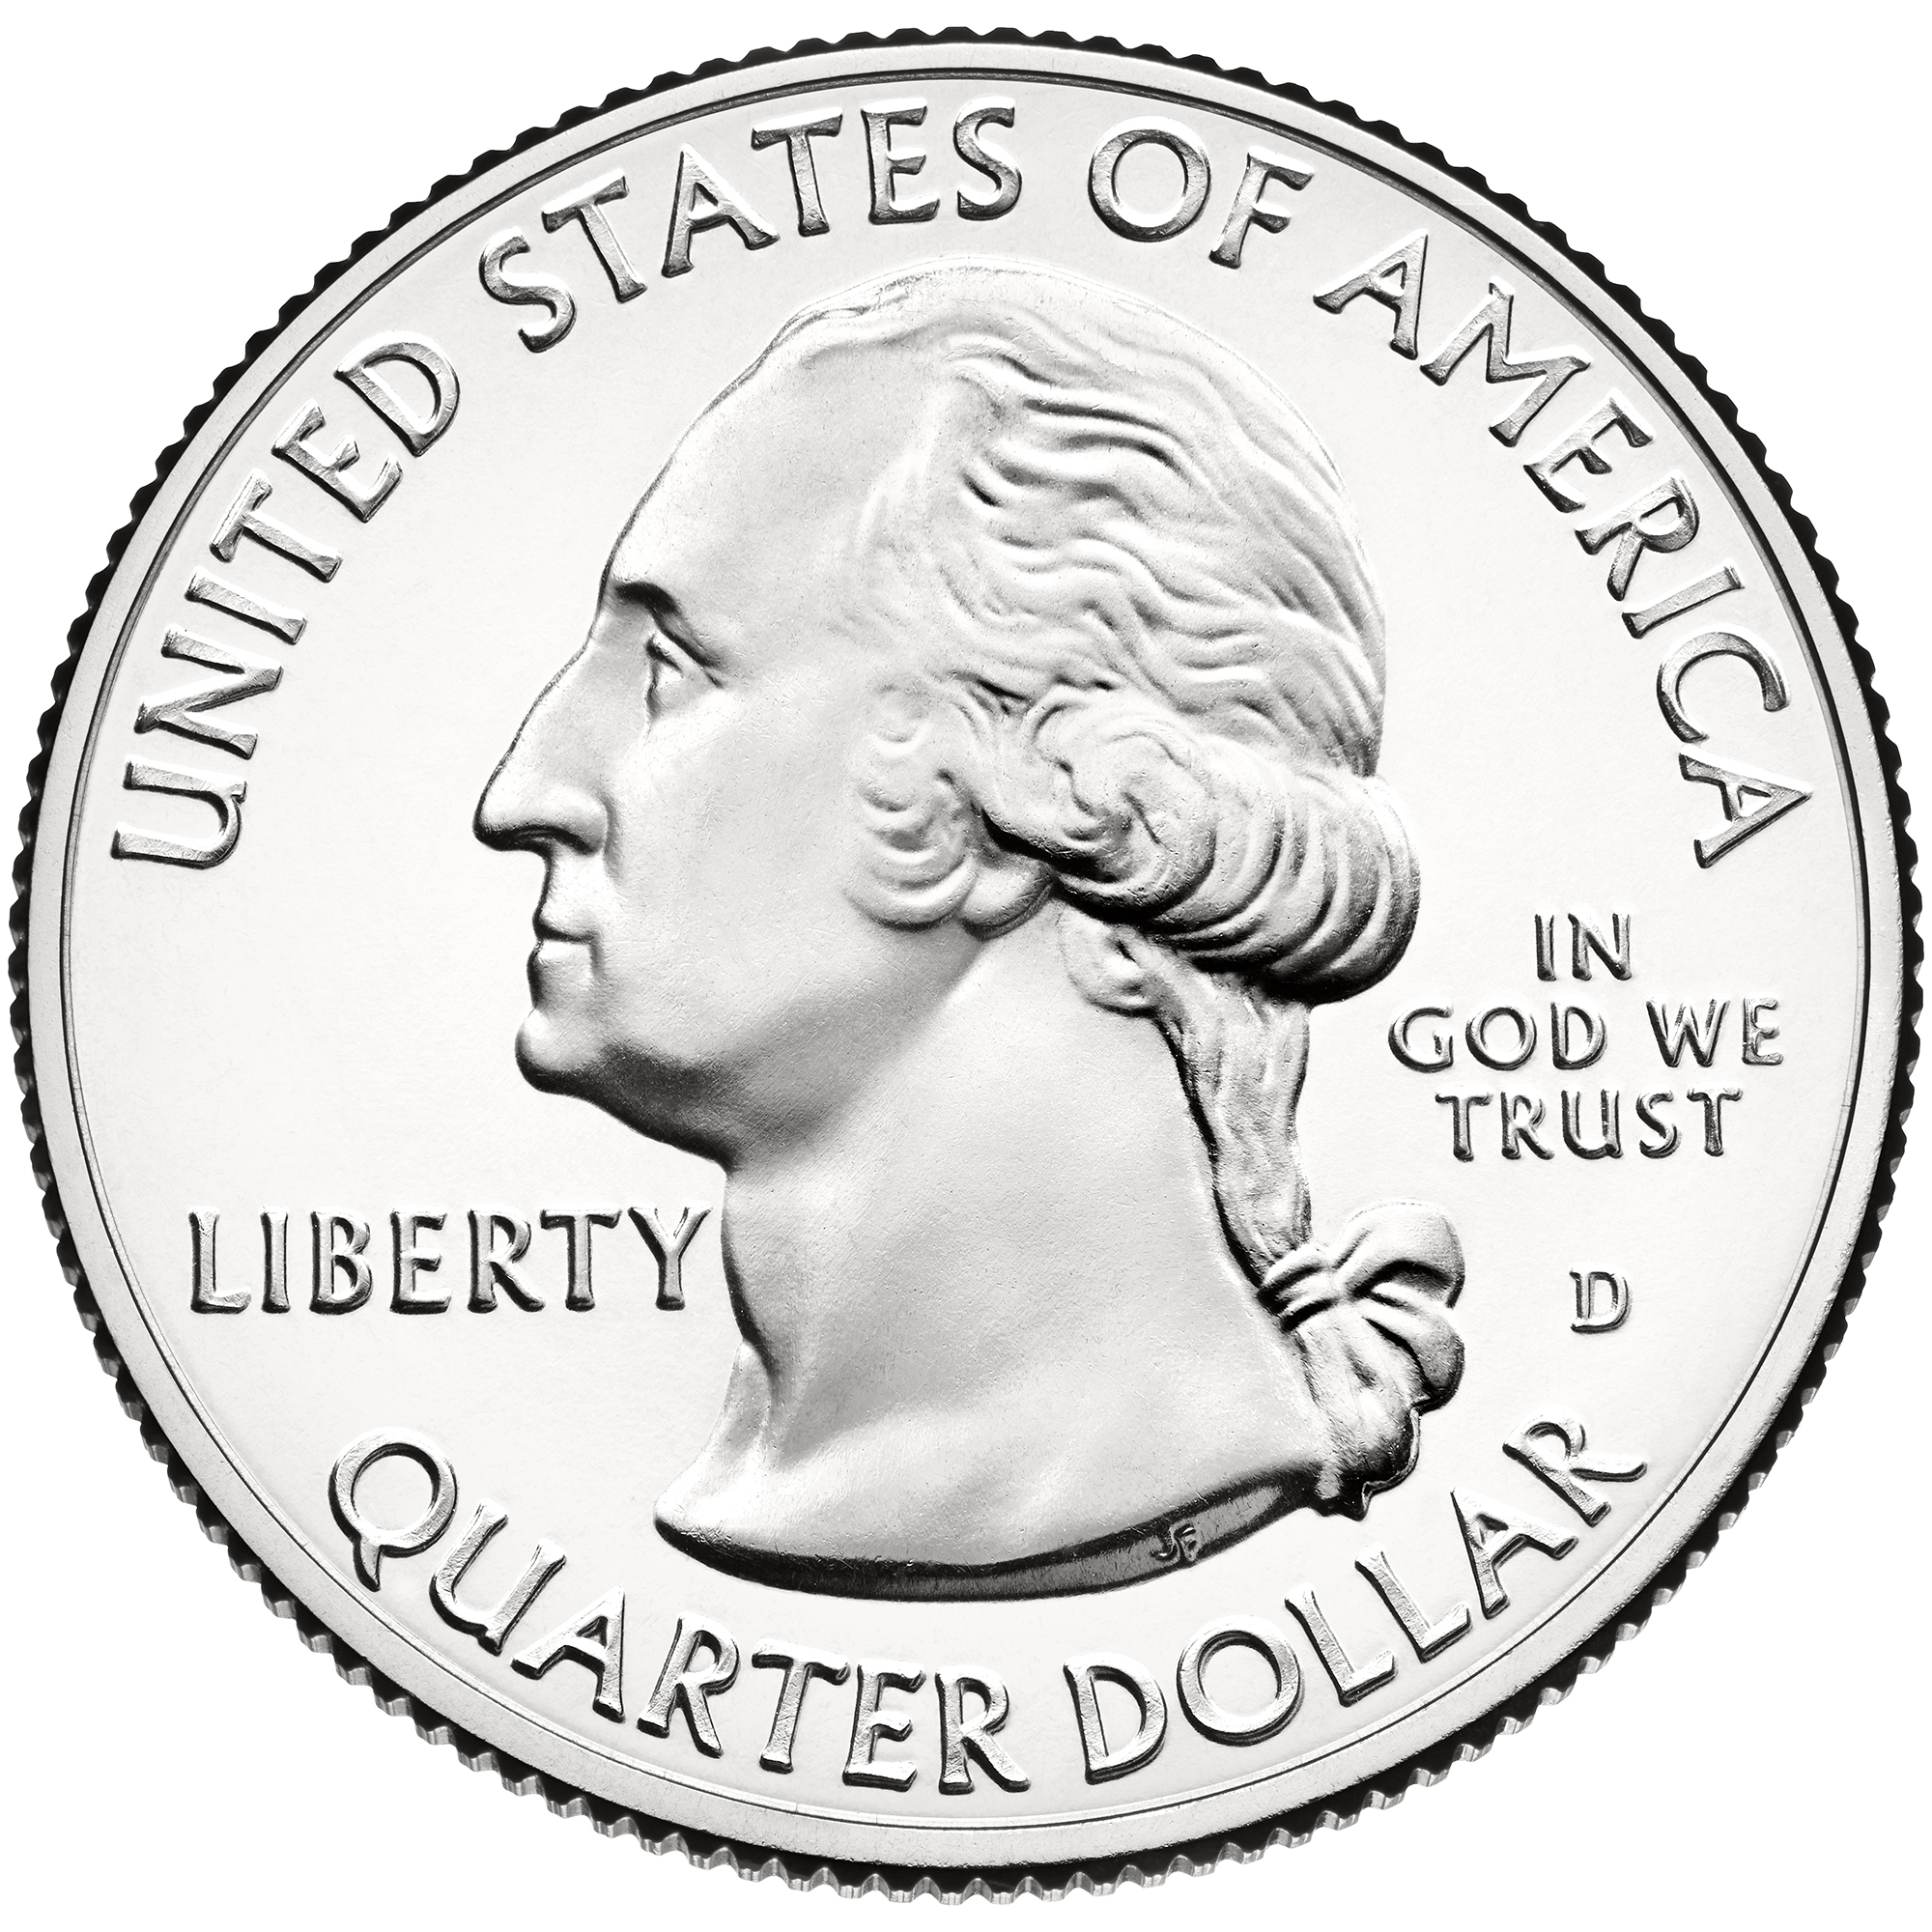 2013 America The Beautiful Quarters Coin Uncirculated Obverse D